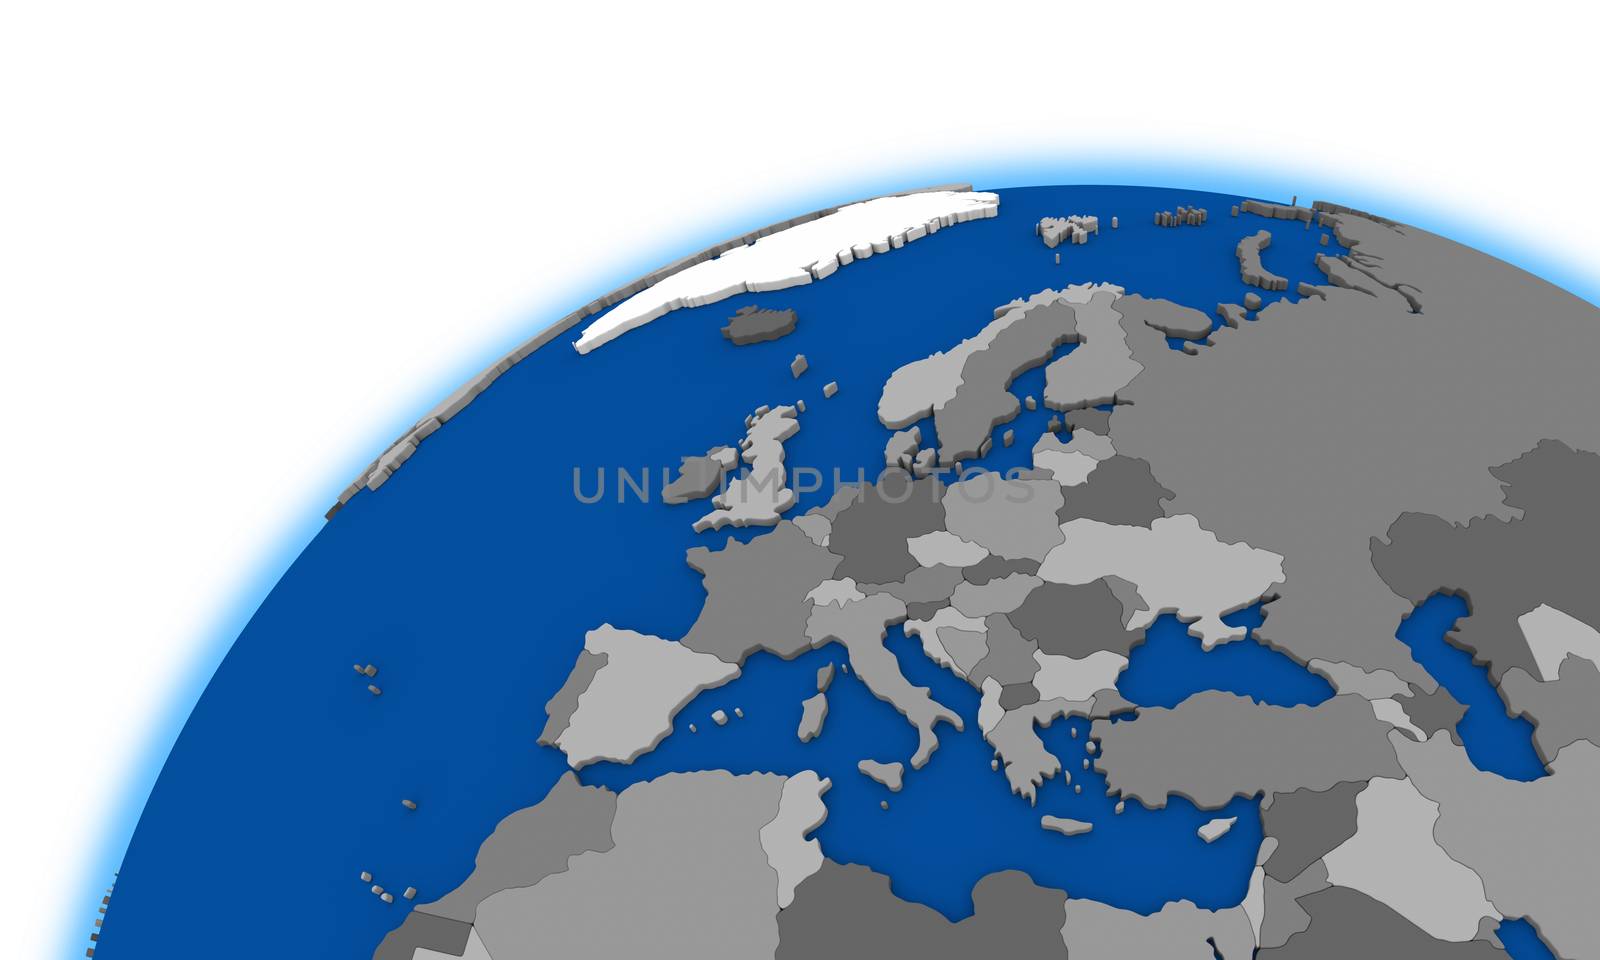 Europe on globe political map by Harvepino